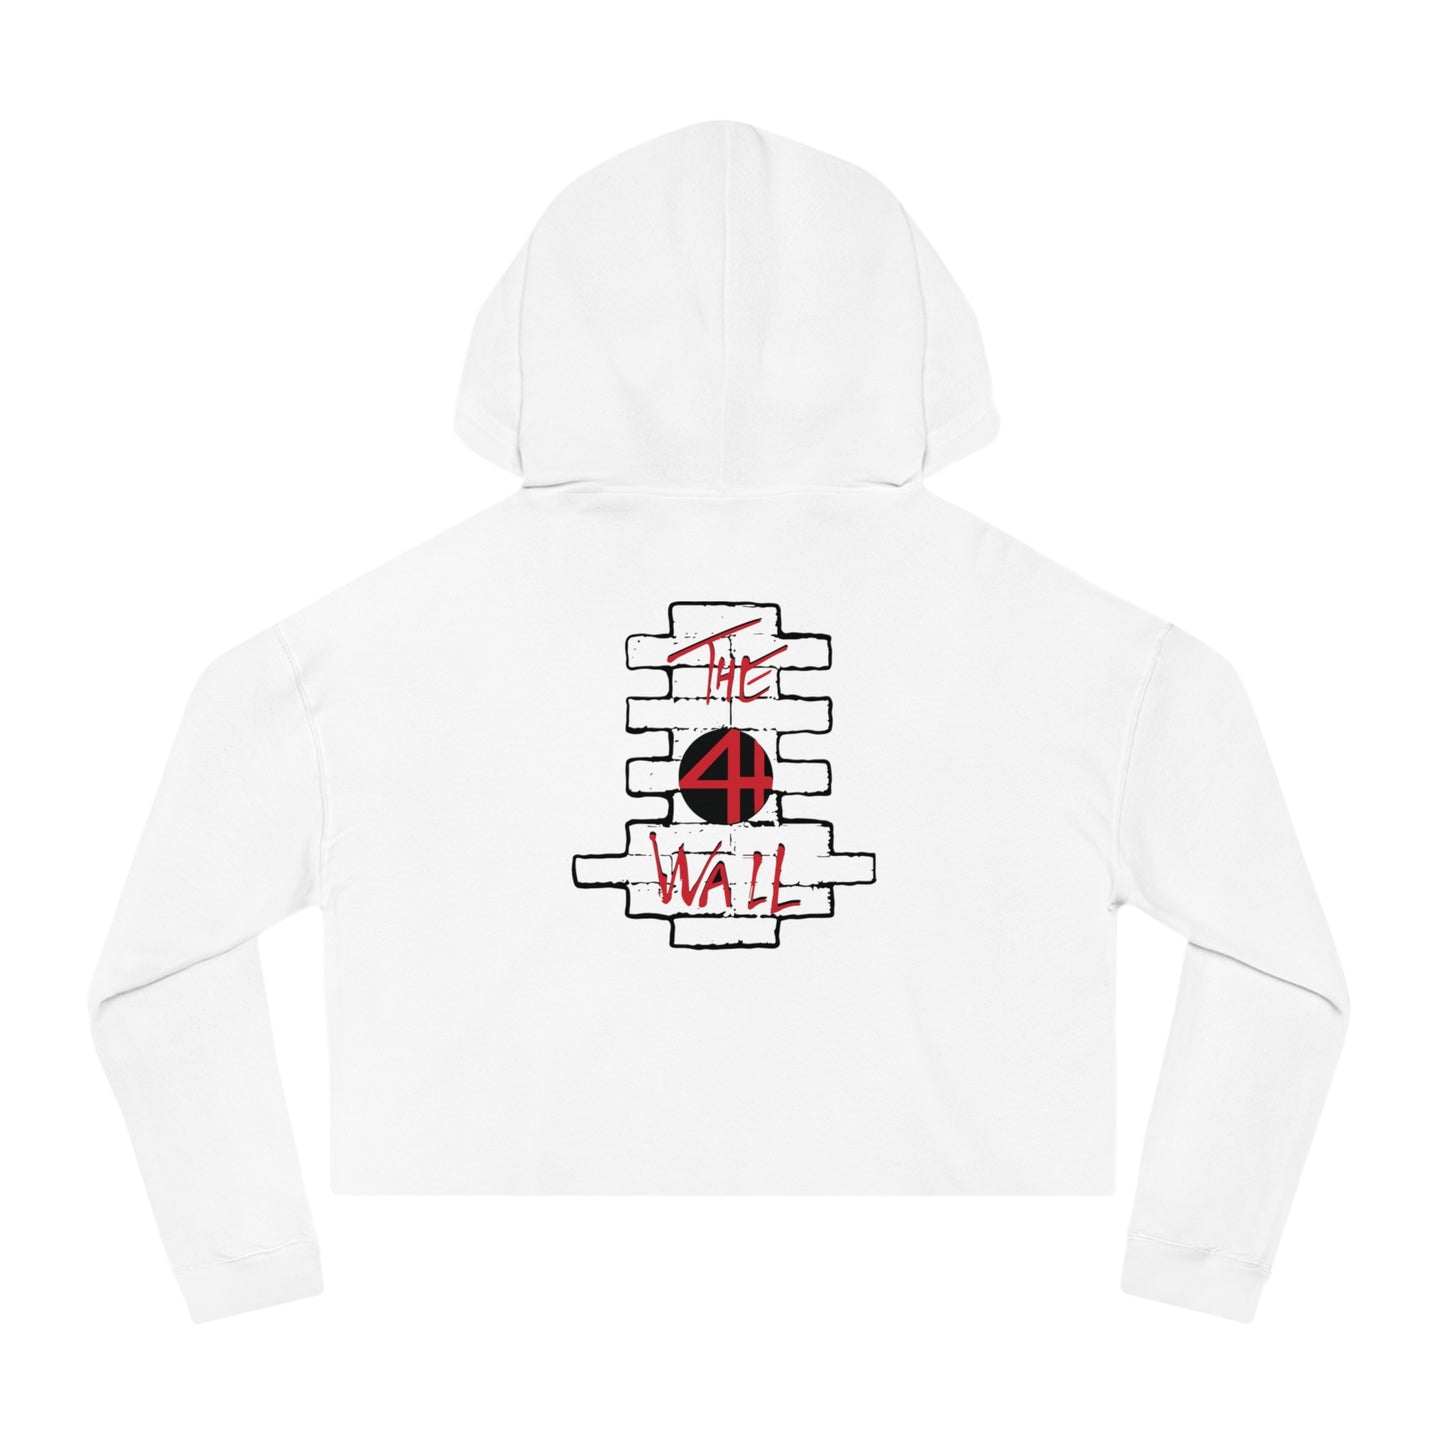 4th Wall The Wall Women’s Cropped Hooded Sweatshirt